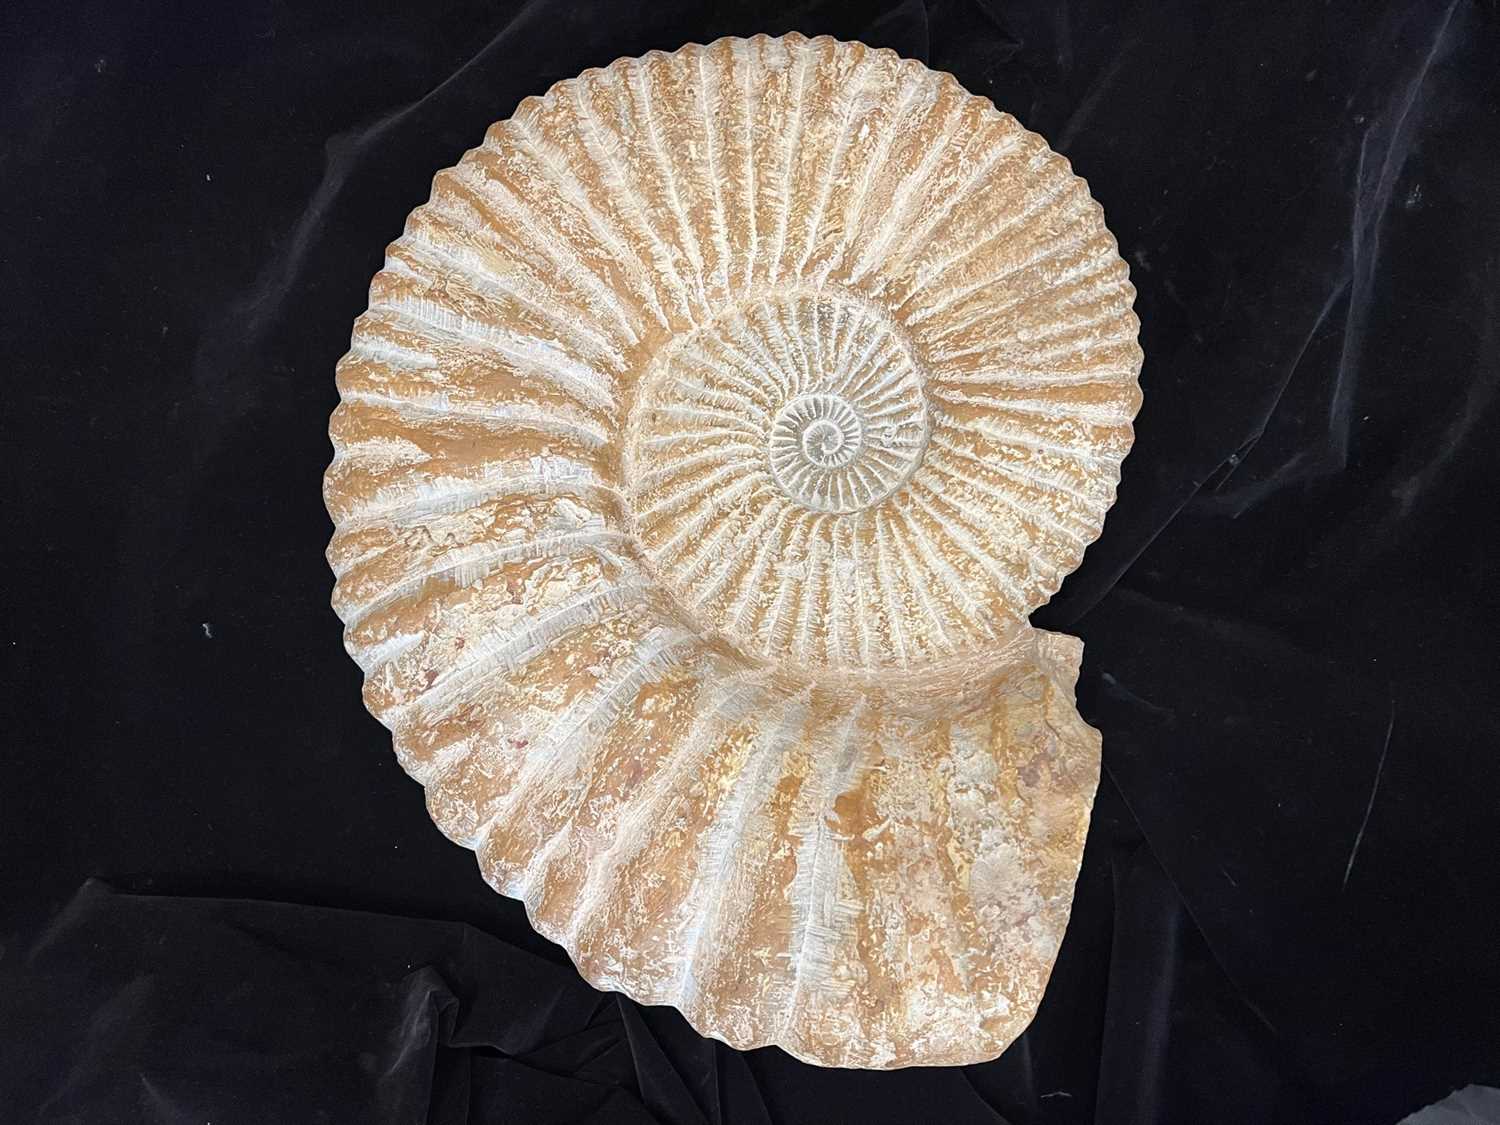 AN ACANTHOCERAS AMMONITE (ROUGH LIMESTONE), LOWER CRETACEOUS PERIOD - Image 5 of 5